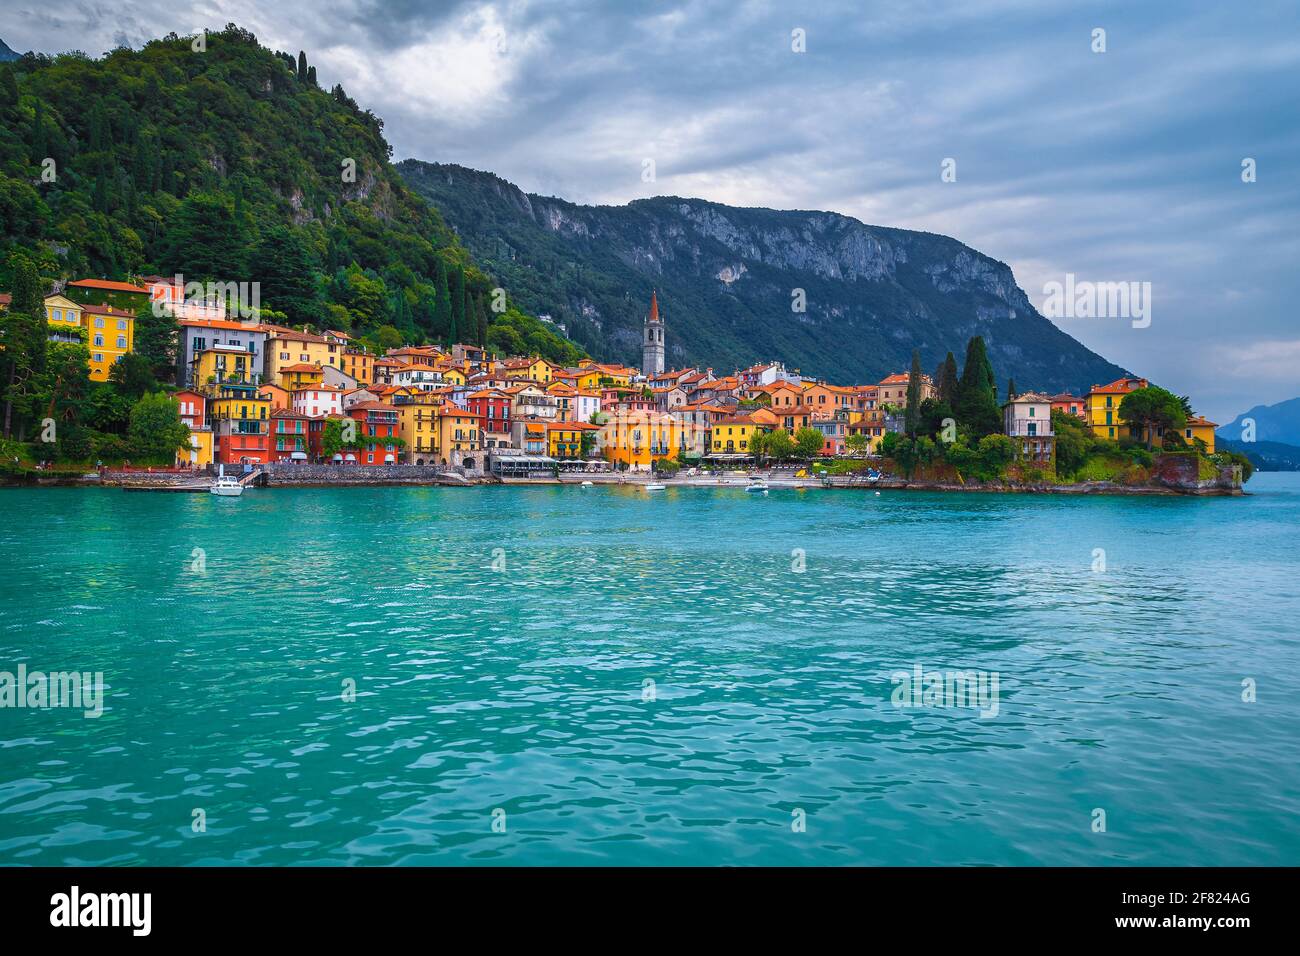 Fantastic resort and waterfront colorful buildings on the shore of the lake Como, Varenna, Lombardy, Italy, Europe Stock Photo